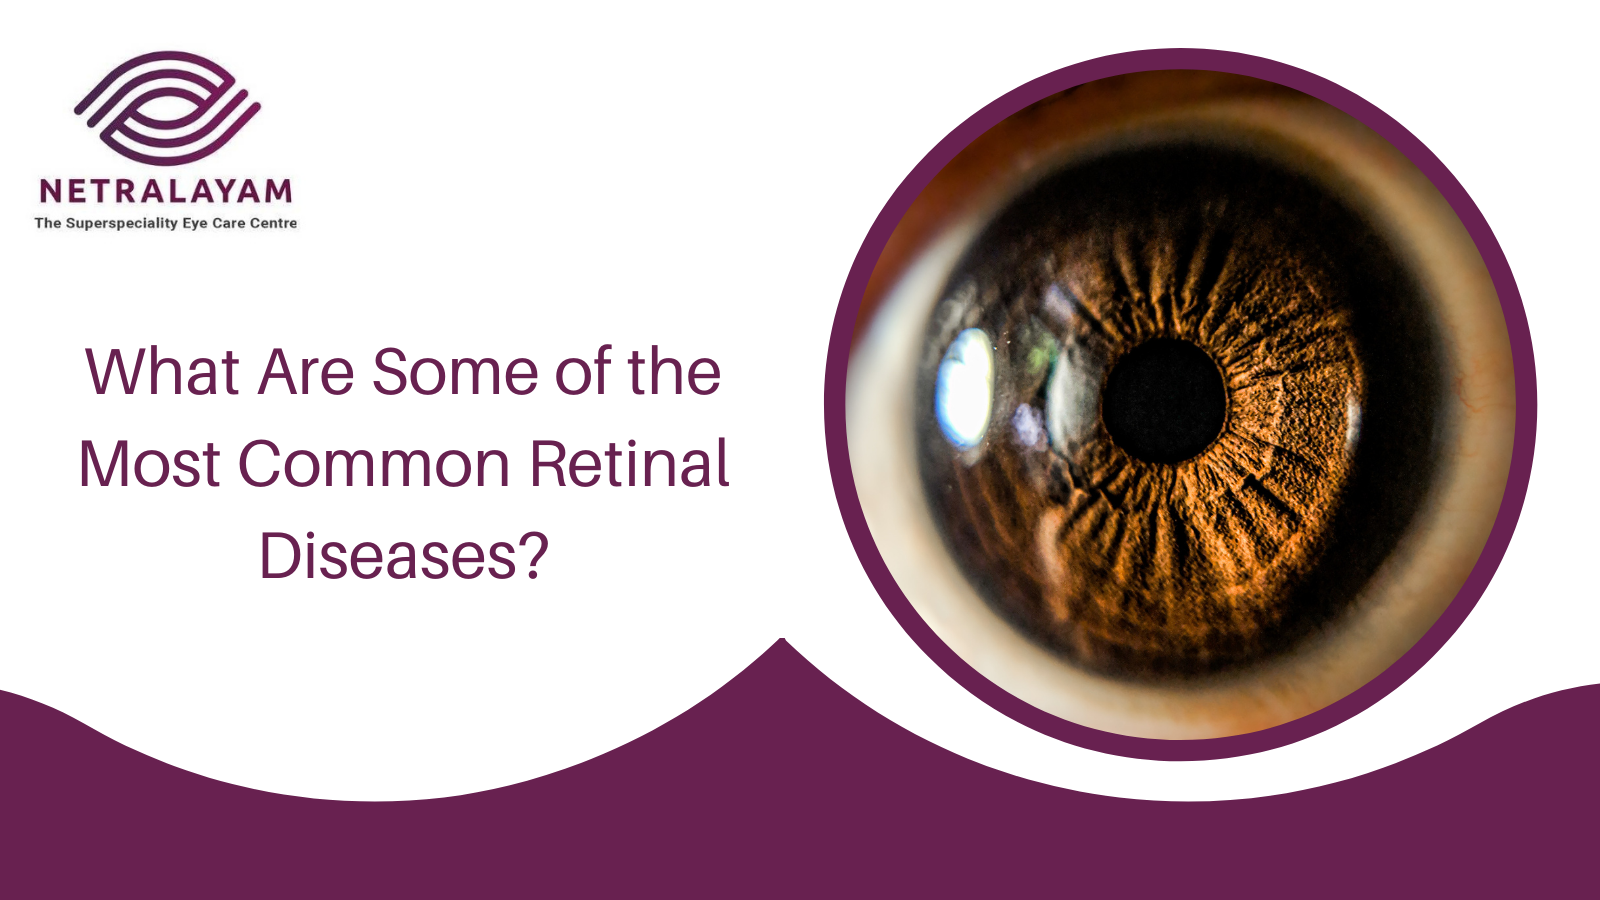 What Are Some of the Most Common Retinal Diseases?